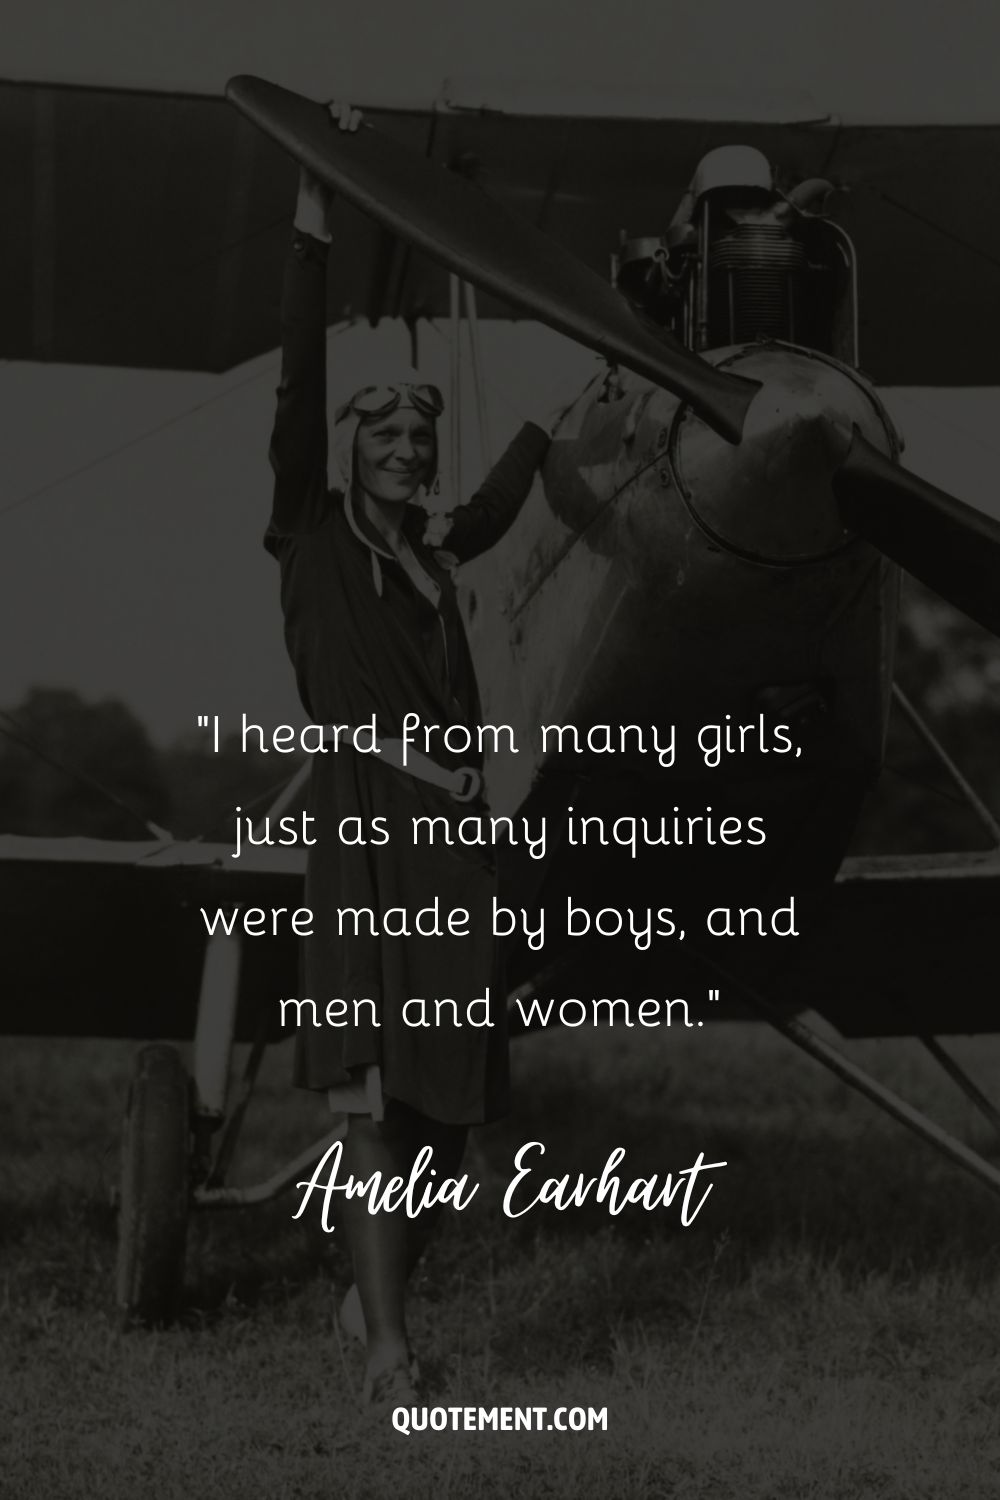 “I heard from many girls, just as many inquiries were made by boys, and men and women.” ― Amelia Earhart, The Fun of It